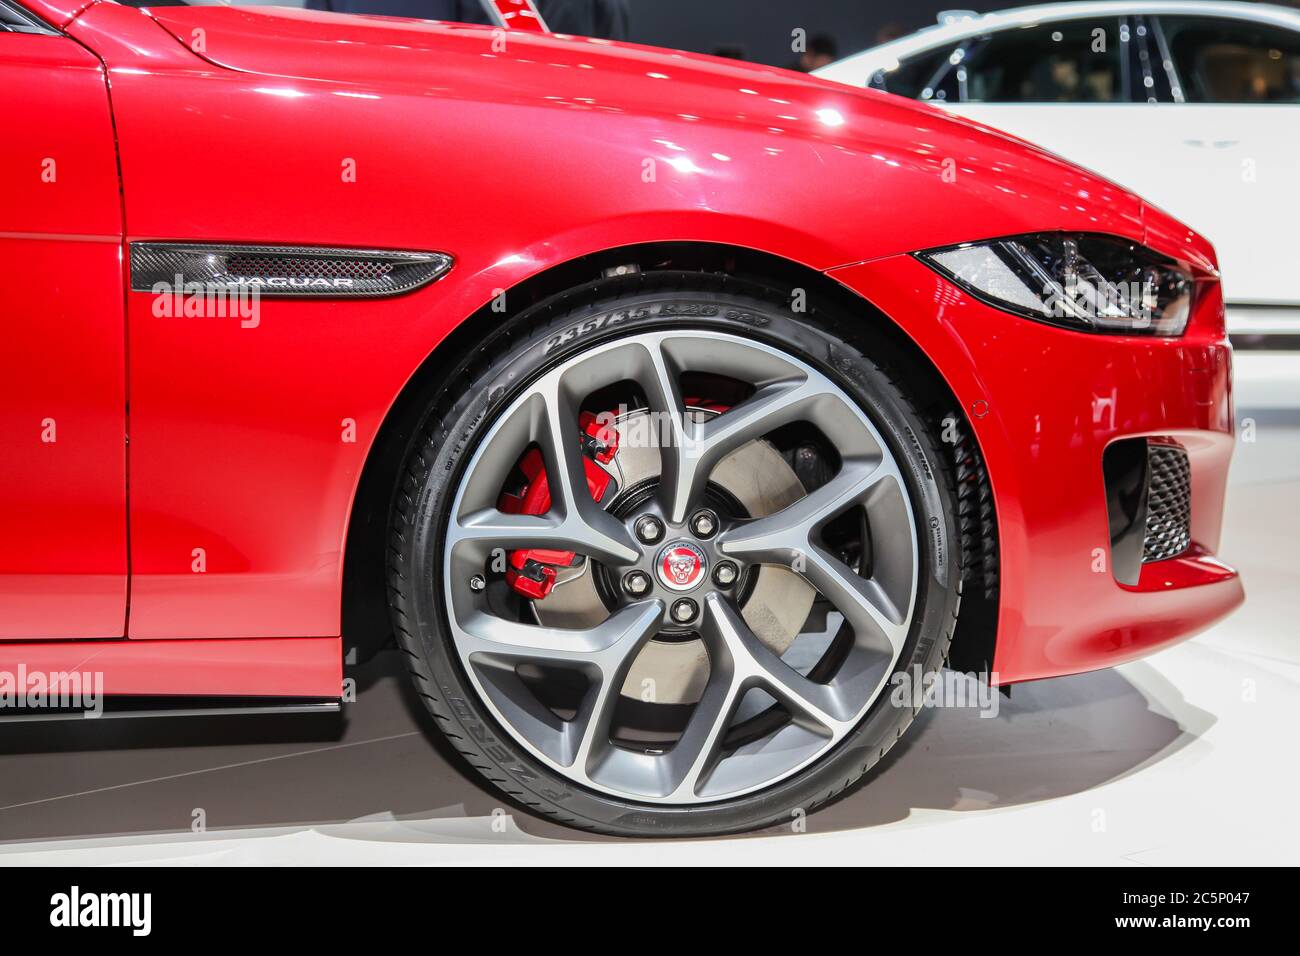 NEW YORK, NY - APRIL 1, 2015:  Jaguar XE front wheel detail at the 2015 New York International Auto Show during Press day. Stock Photo